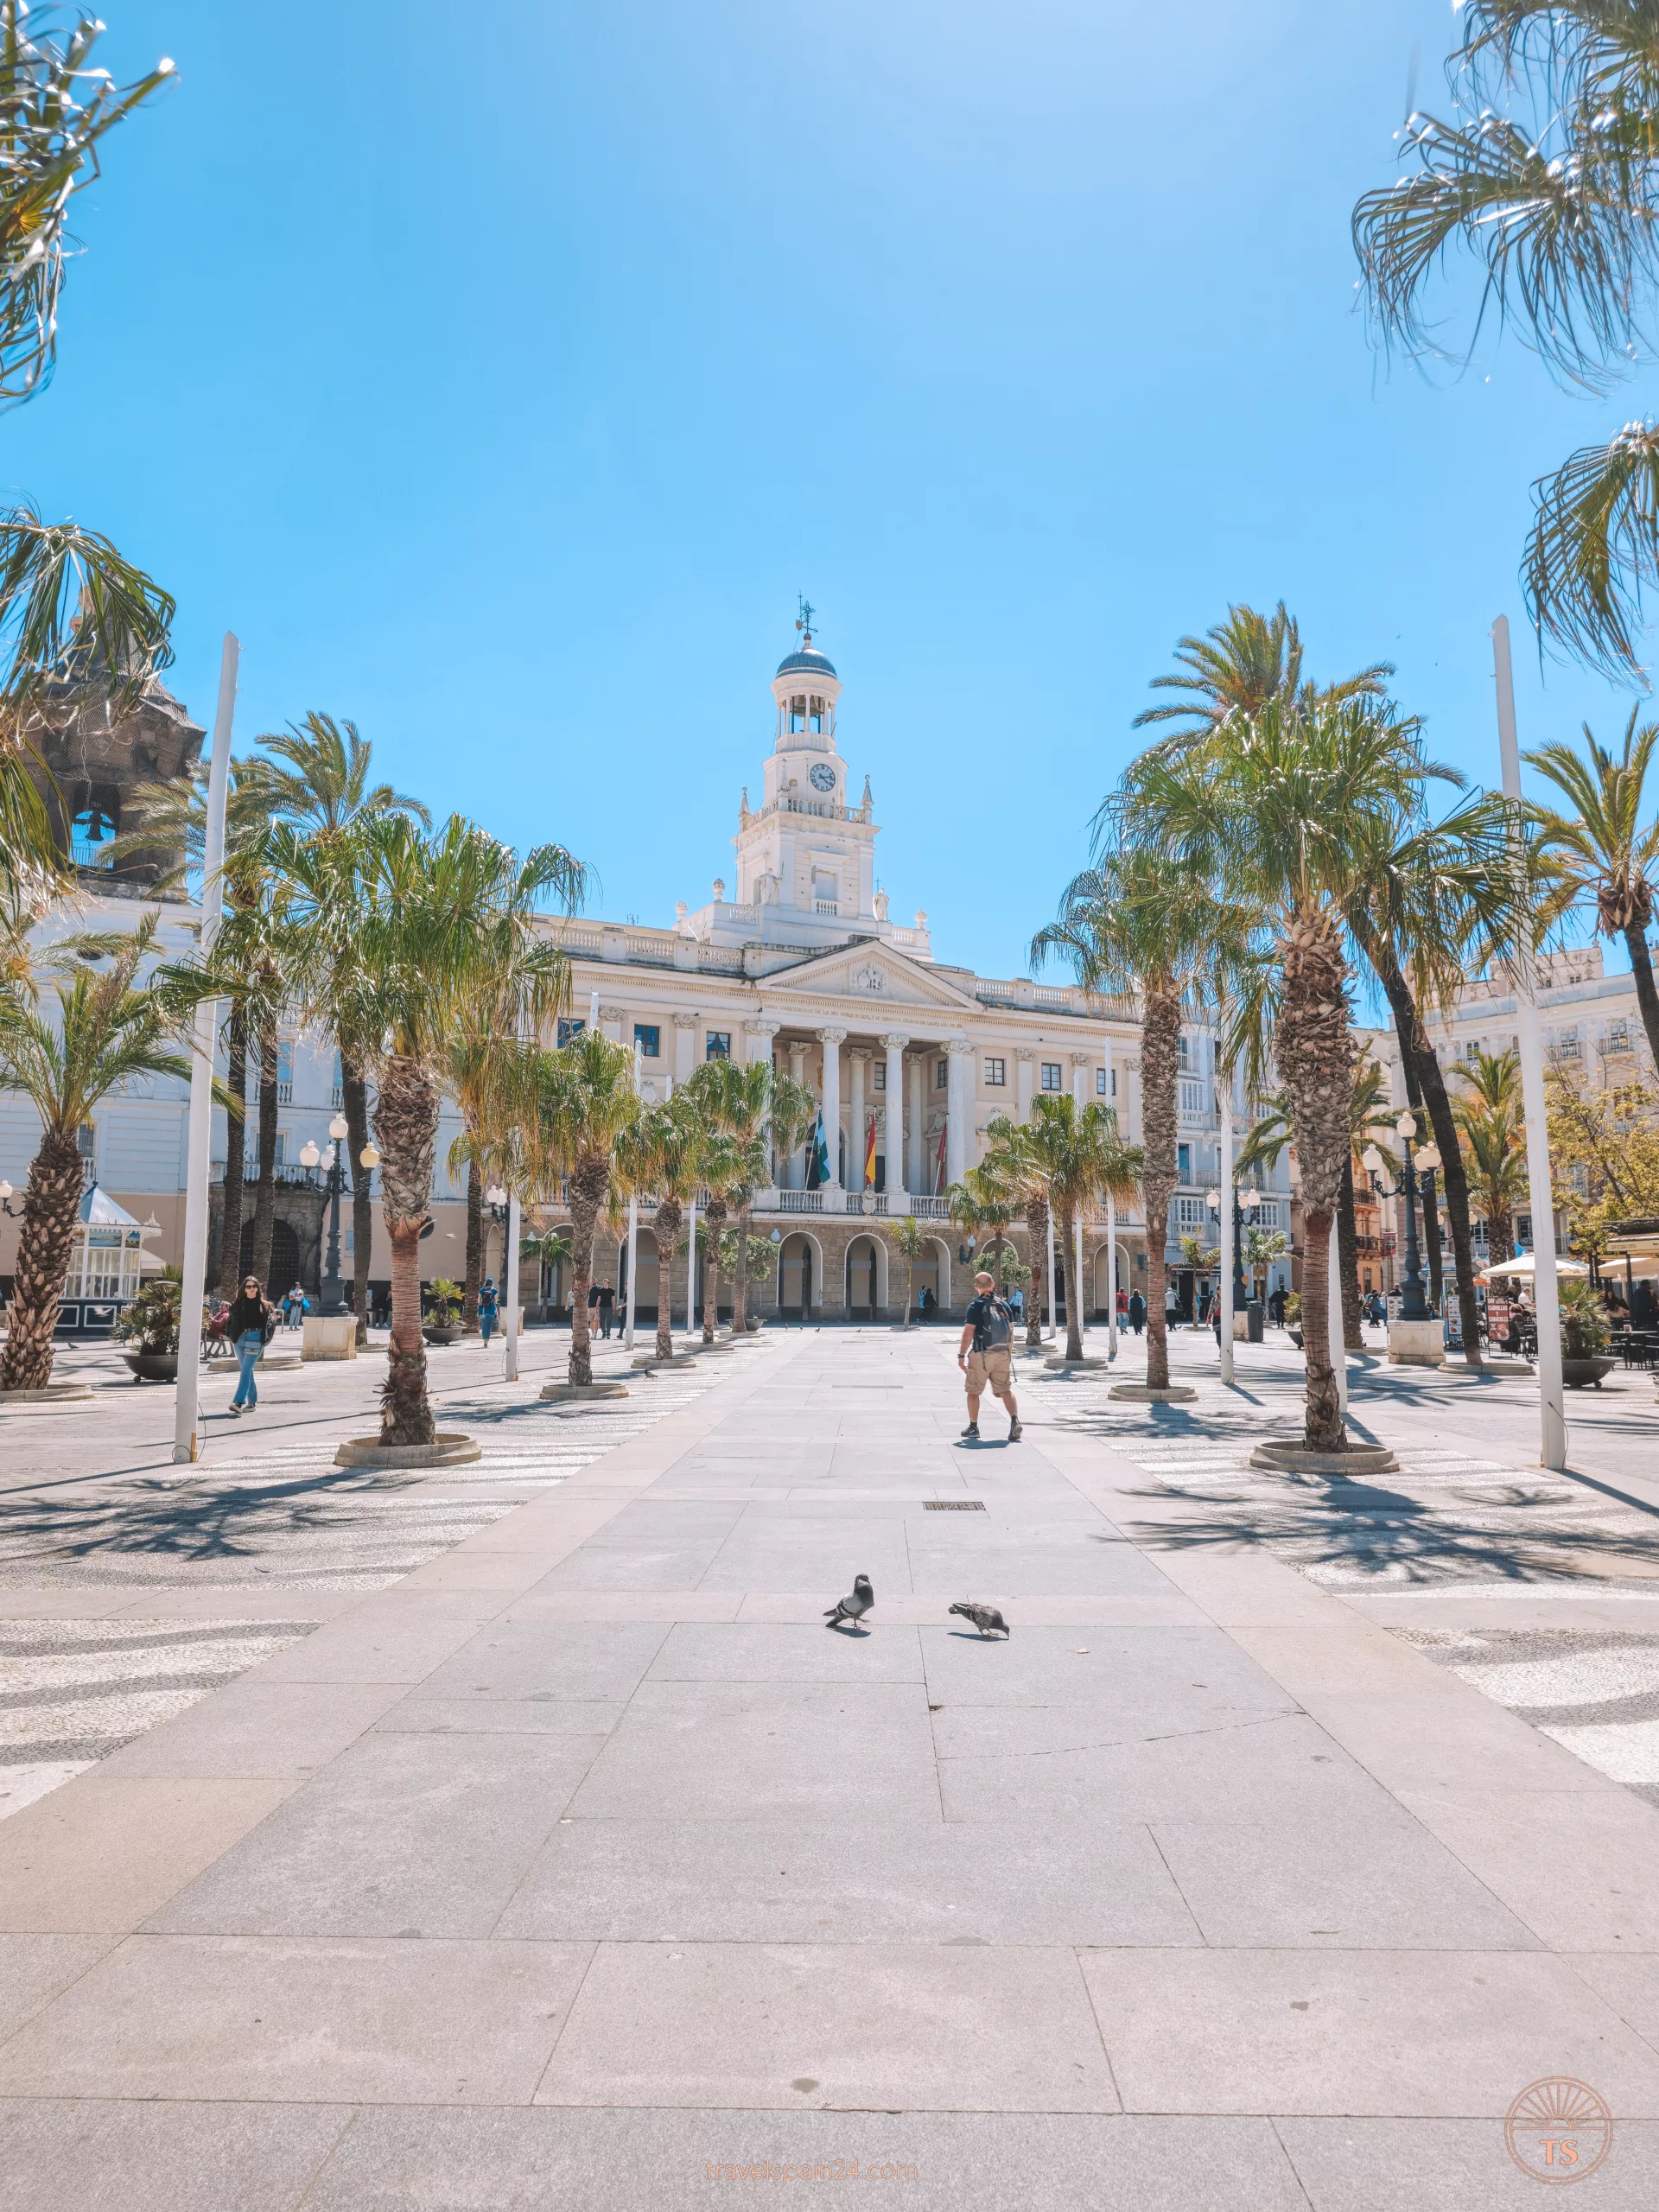 View of Plaza San Juan de Dios on a sunny day, with Cadiz City Hall towering in the background. This image captures the vibrant atmosphere of one of Cadiz's historic squares